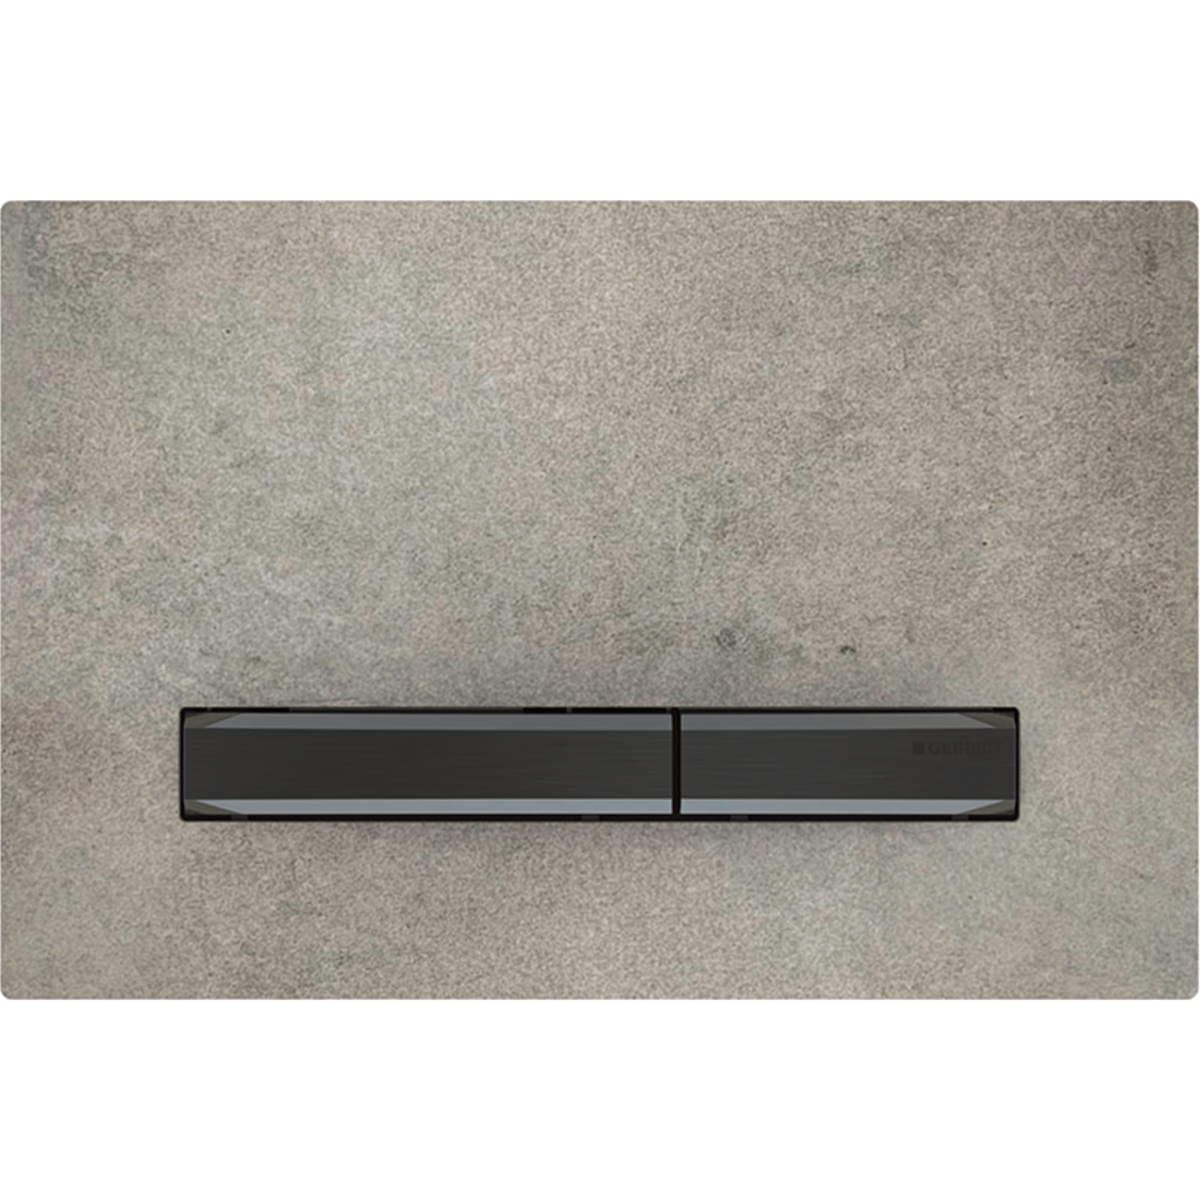 Geberit 115.671.JV.2 Actuator Plate Sigma50 for Dual Flush, Metal Colour Black Chrome - Base Plate and Buttons: Black Chrome/Cover Plate: Concrete Look